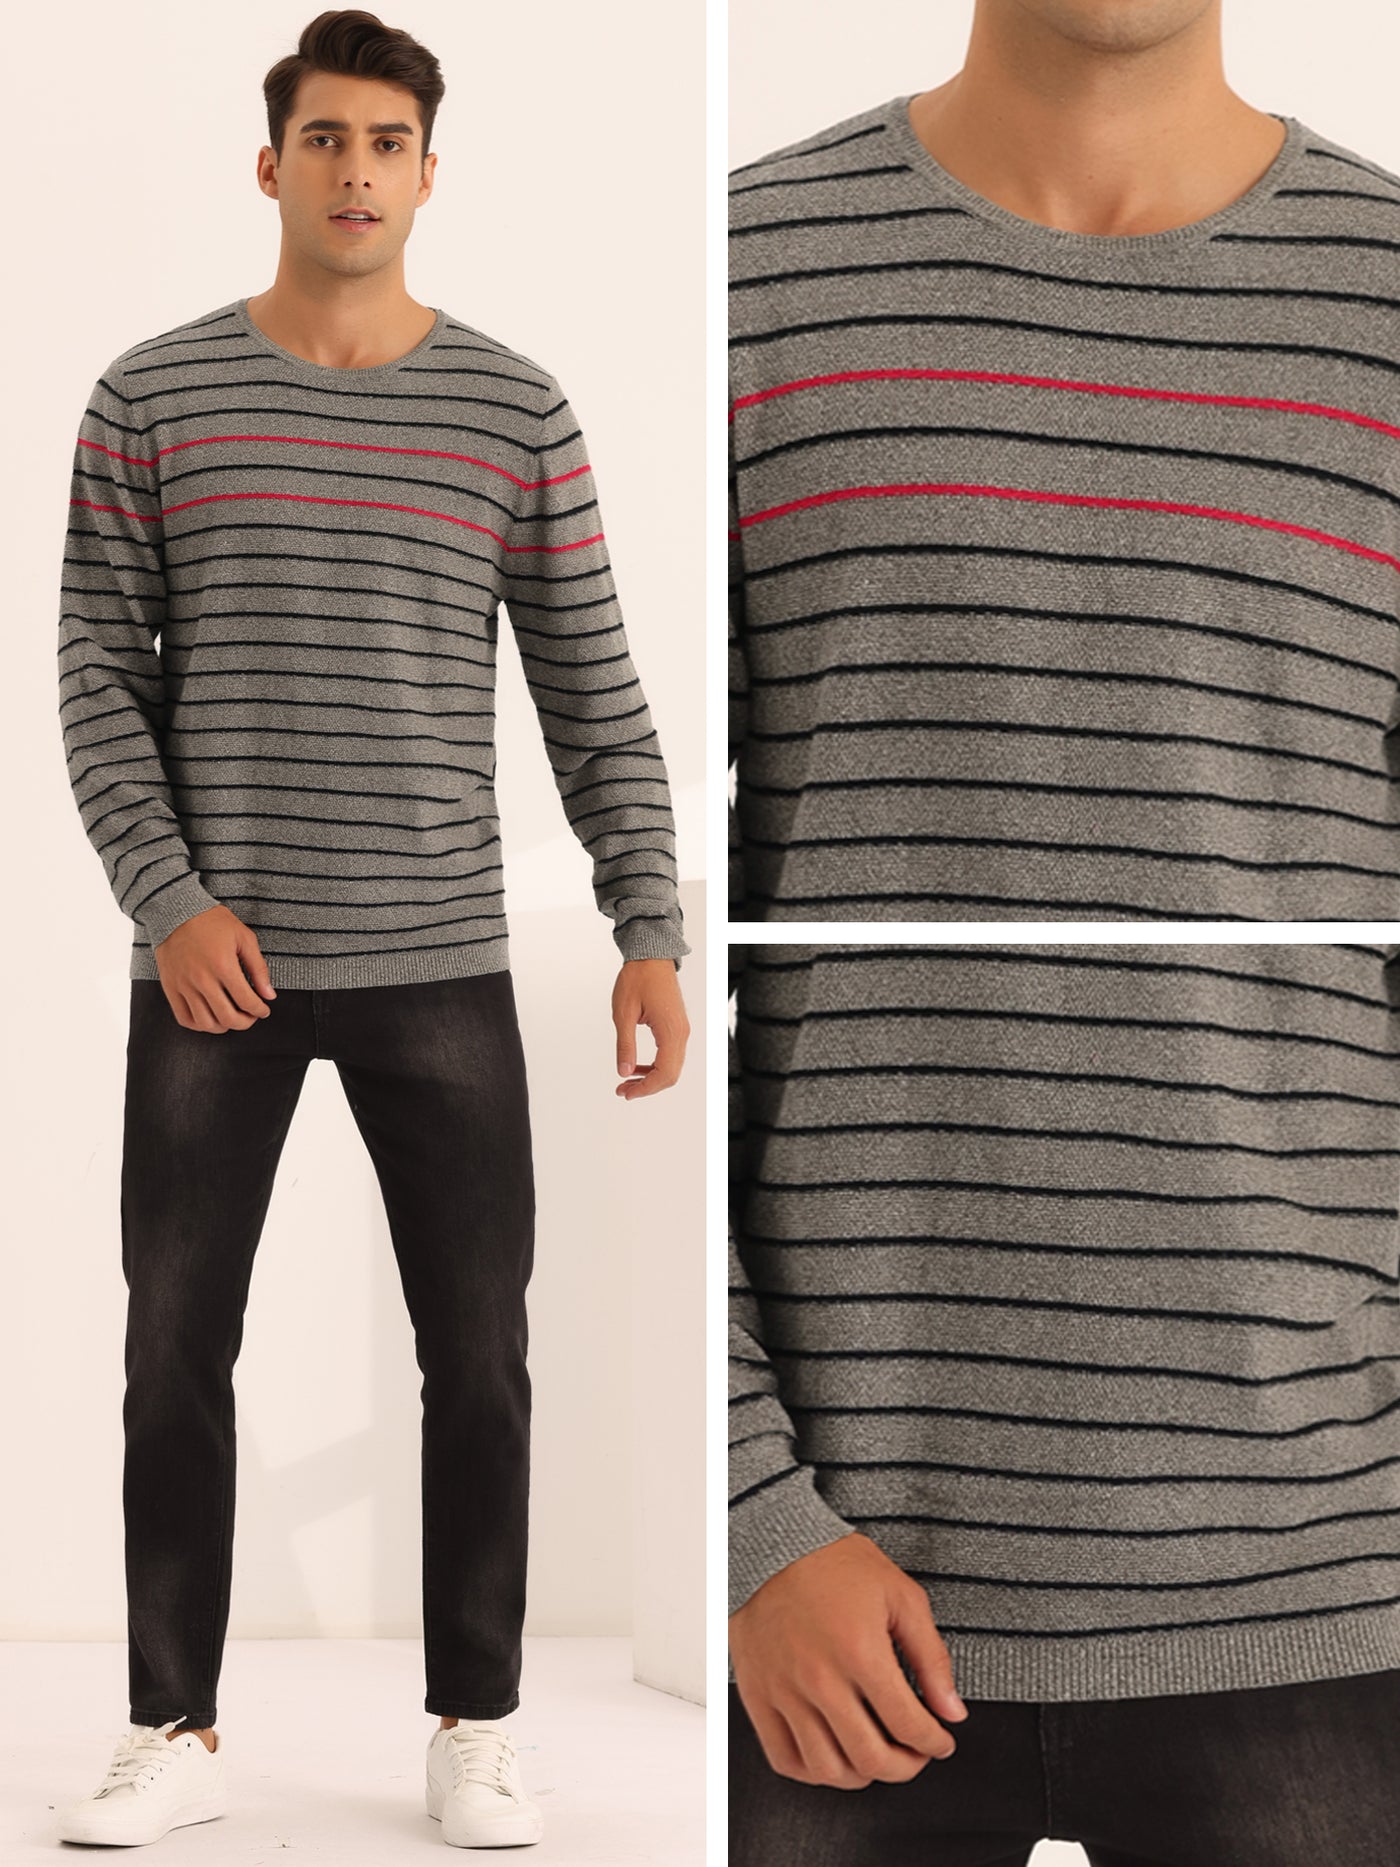 Bublédon Striped Sweaters for Men's Pullover Crew Neck Long Sleeves Knit Sweater